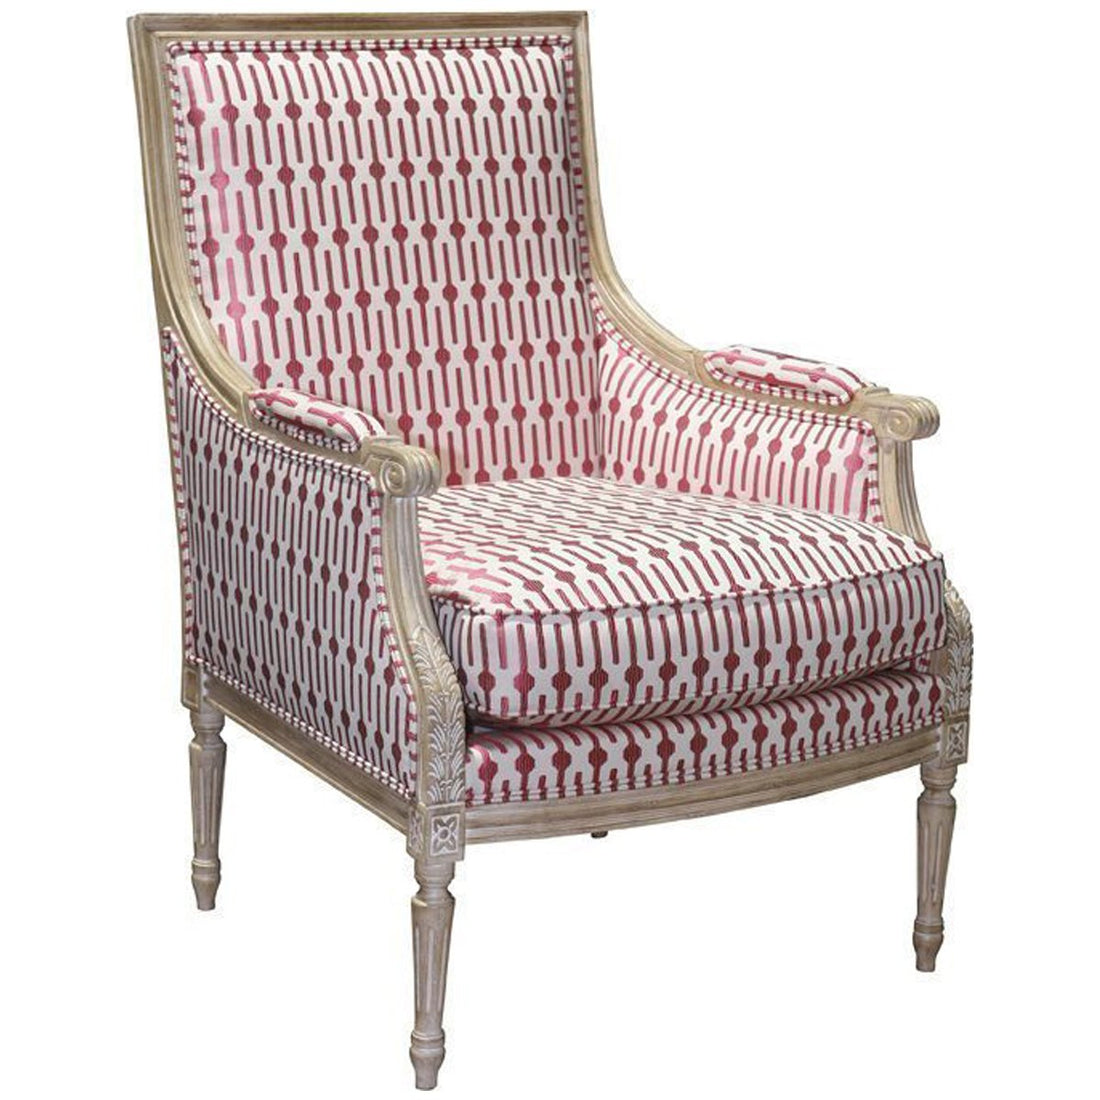 Lillian August Exeter Chair